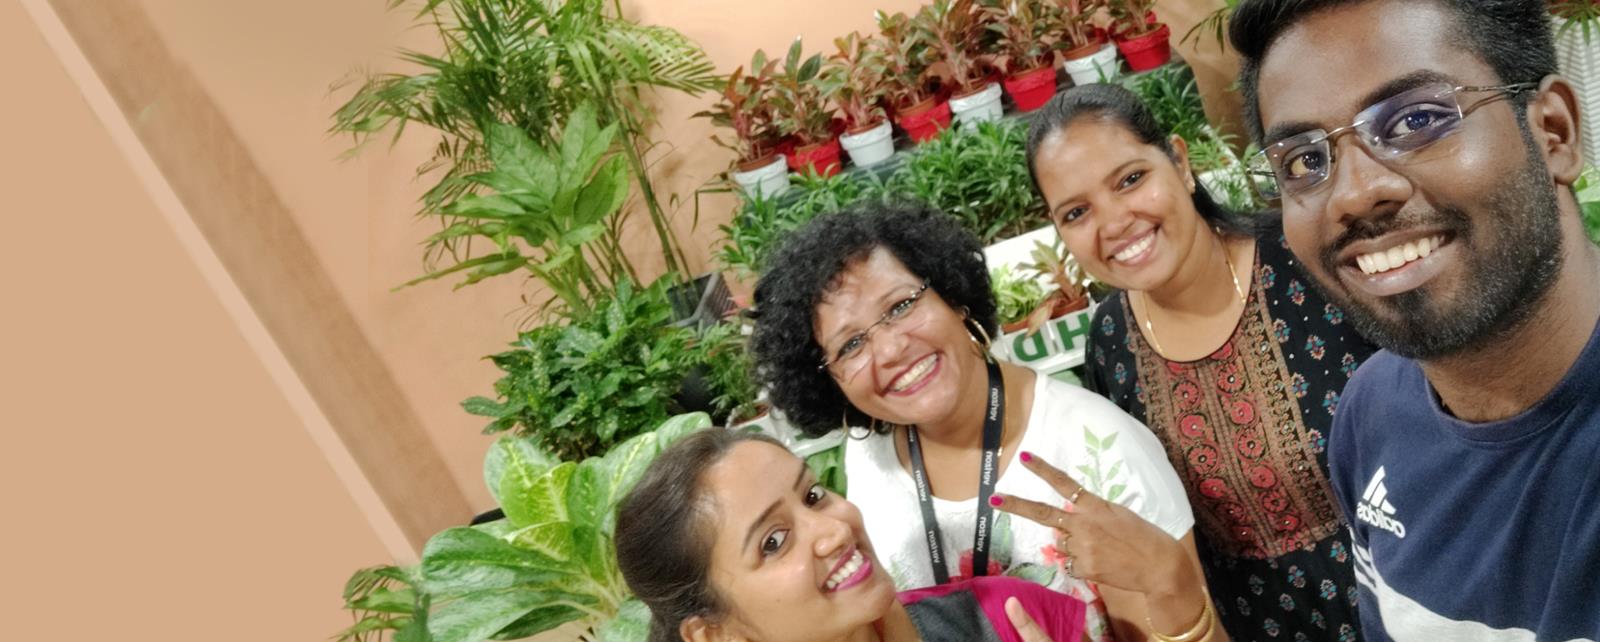 Group Of Colleagues With Plants